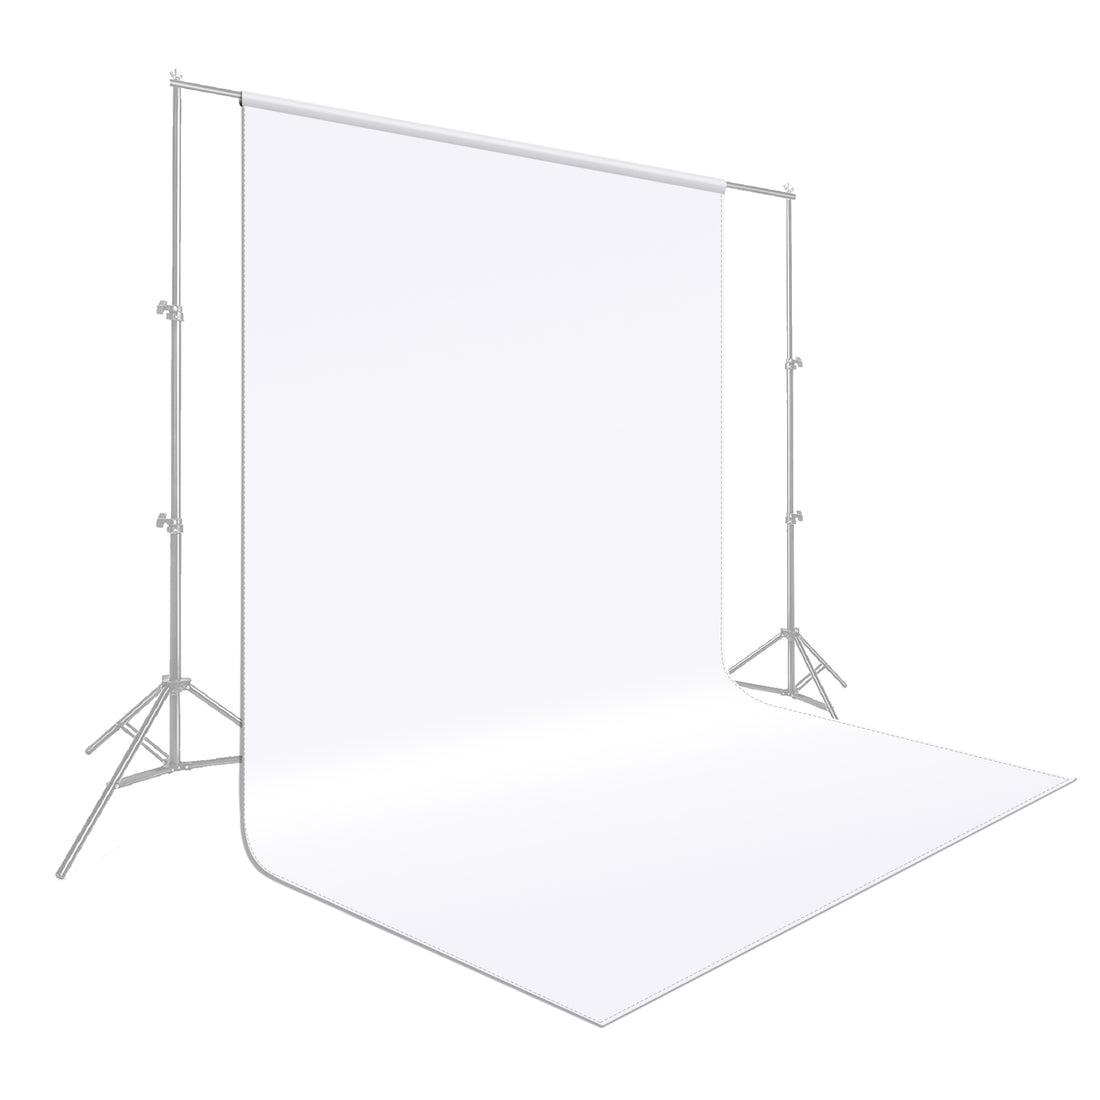 Avezano Solid Color Photography Backdrop Many Colors Are Available. Green Screen Gray Screen White Screen Blue Screen